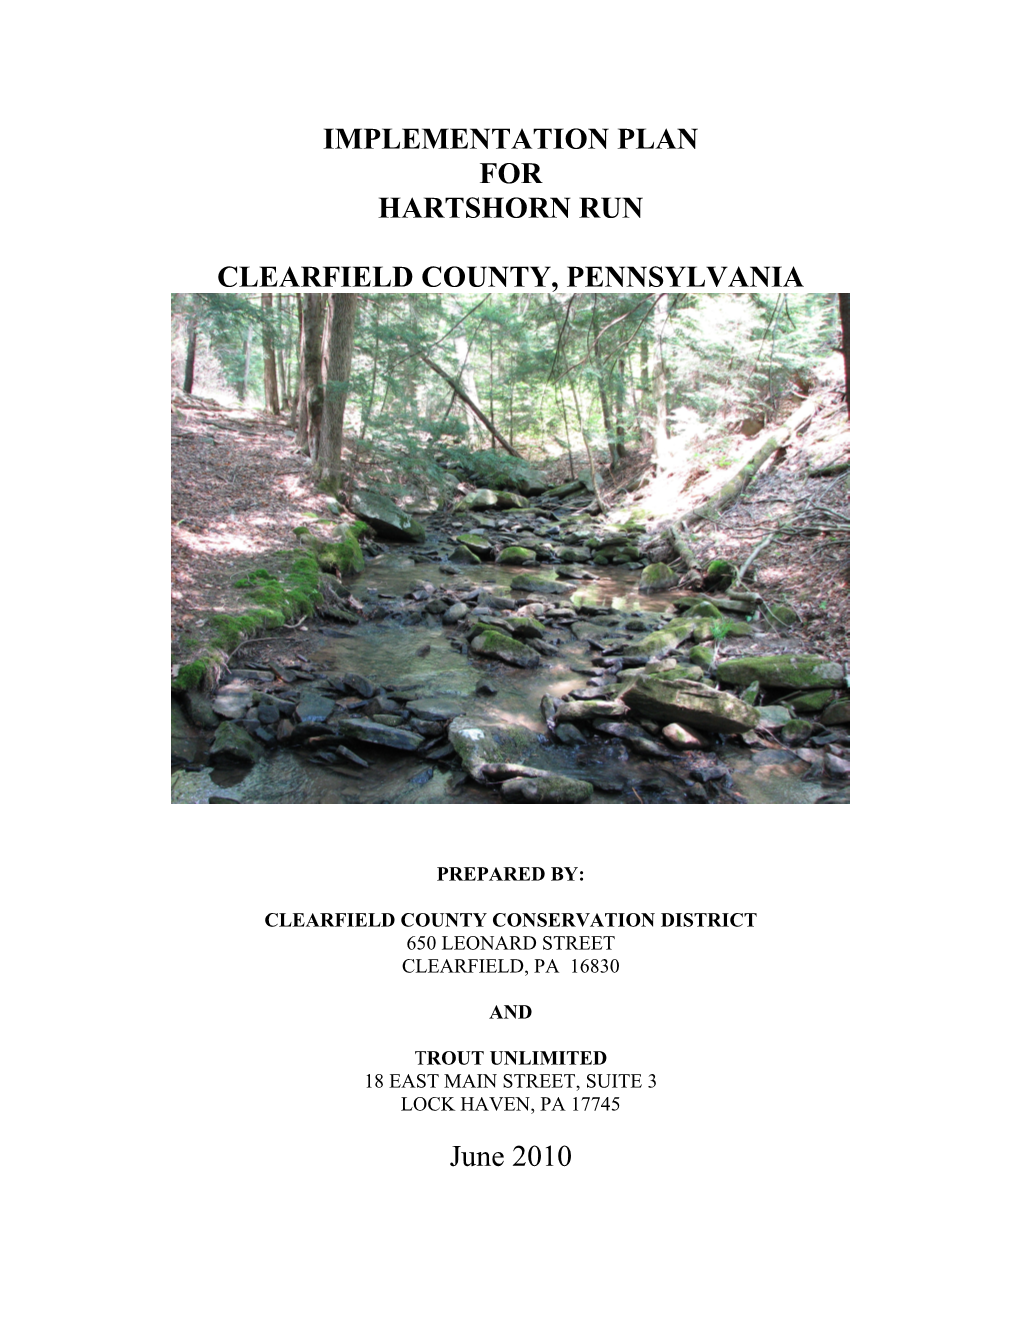 Implementation Plan for Hartshorn Run Clearfield County, Pennsylvania